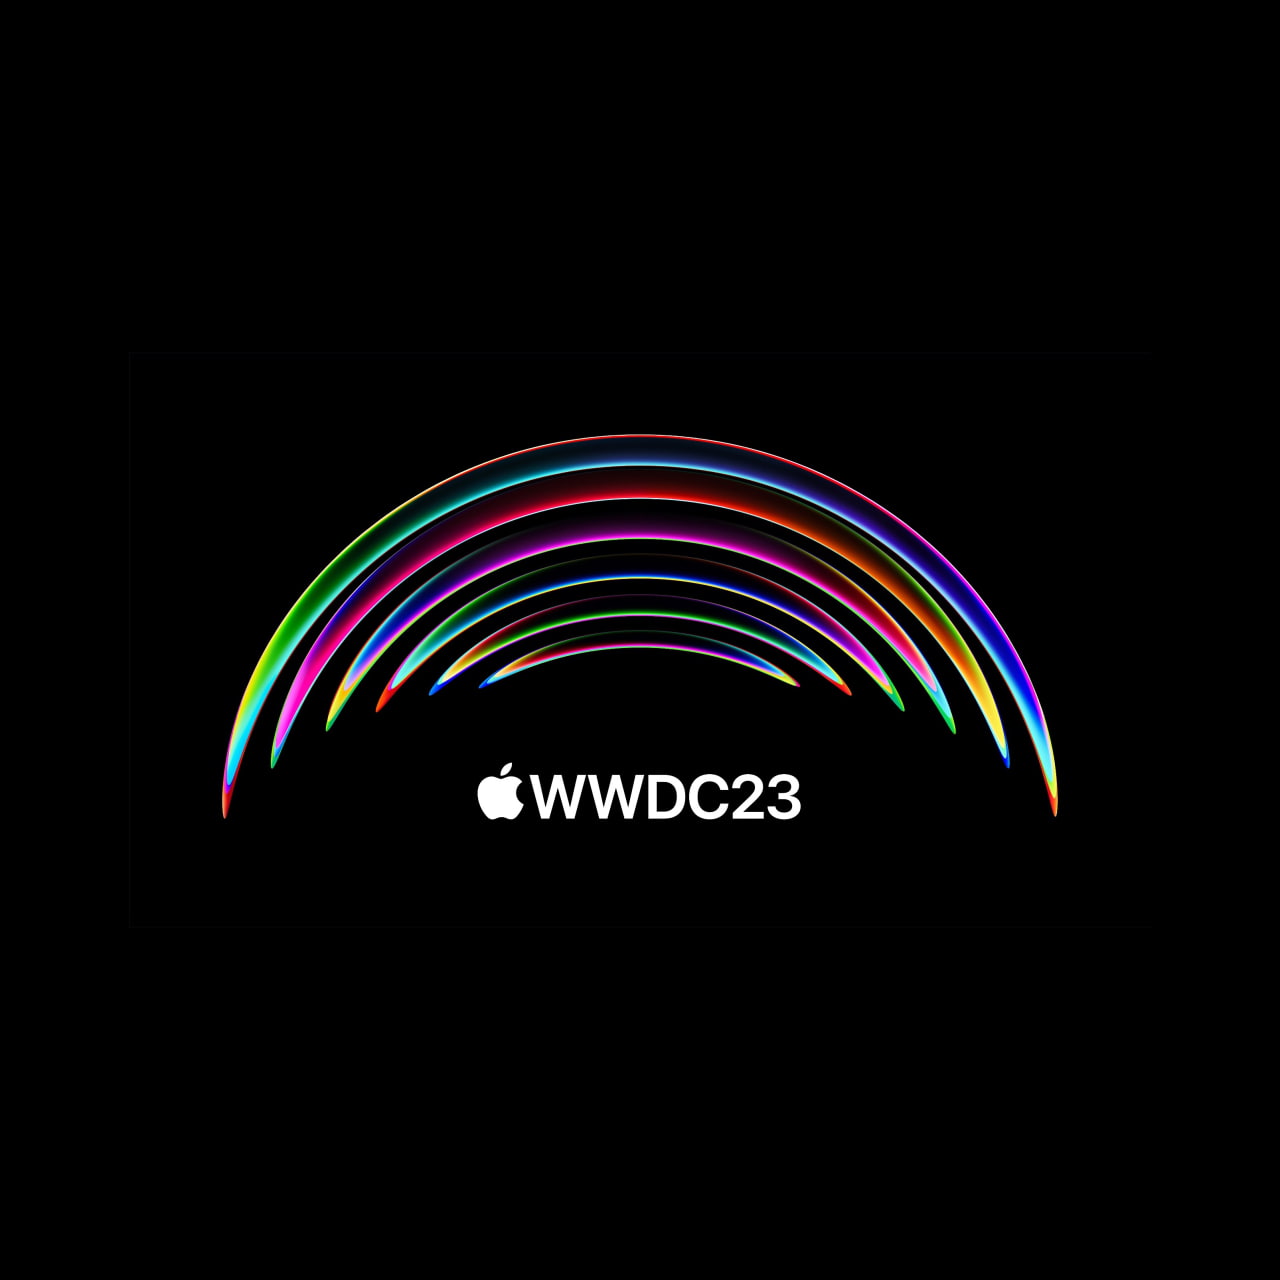 Download the WWDC 2023 Wallpaper Here iClarified